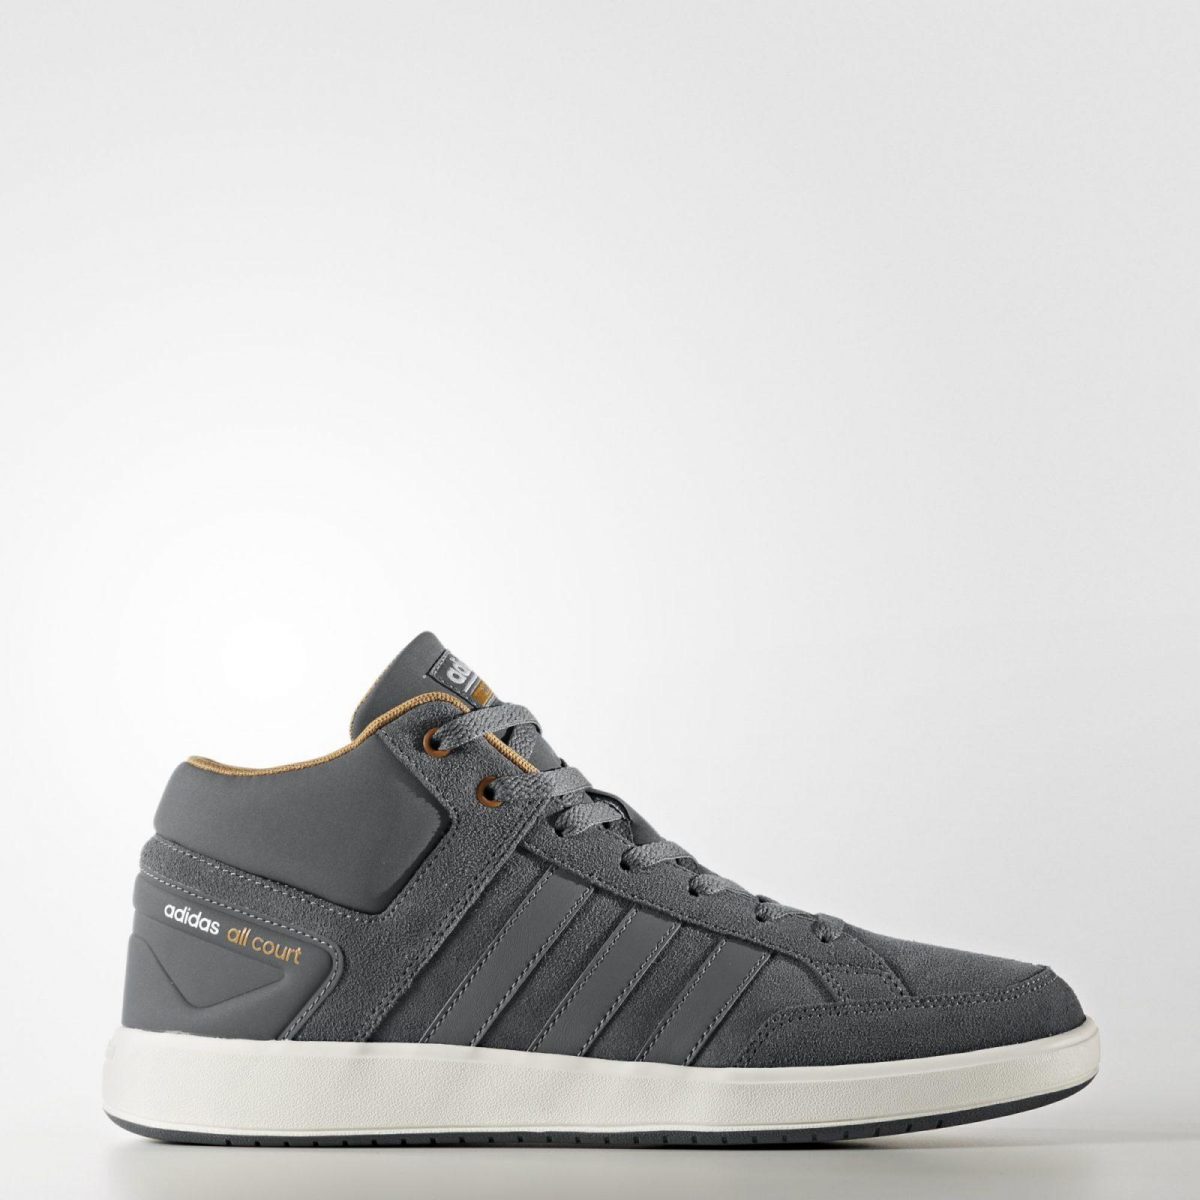 adidas cloudfoam all court mid